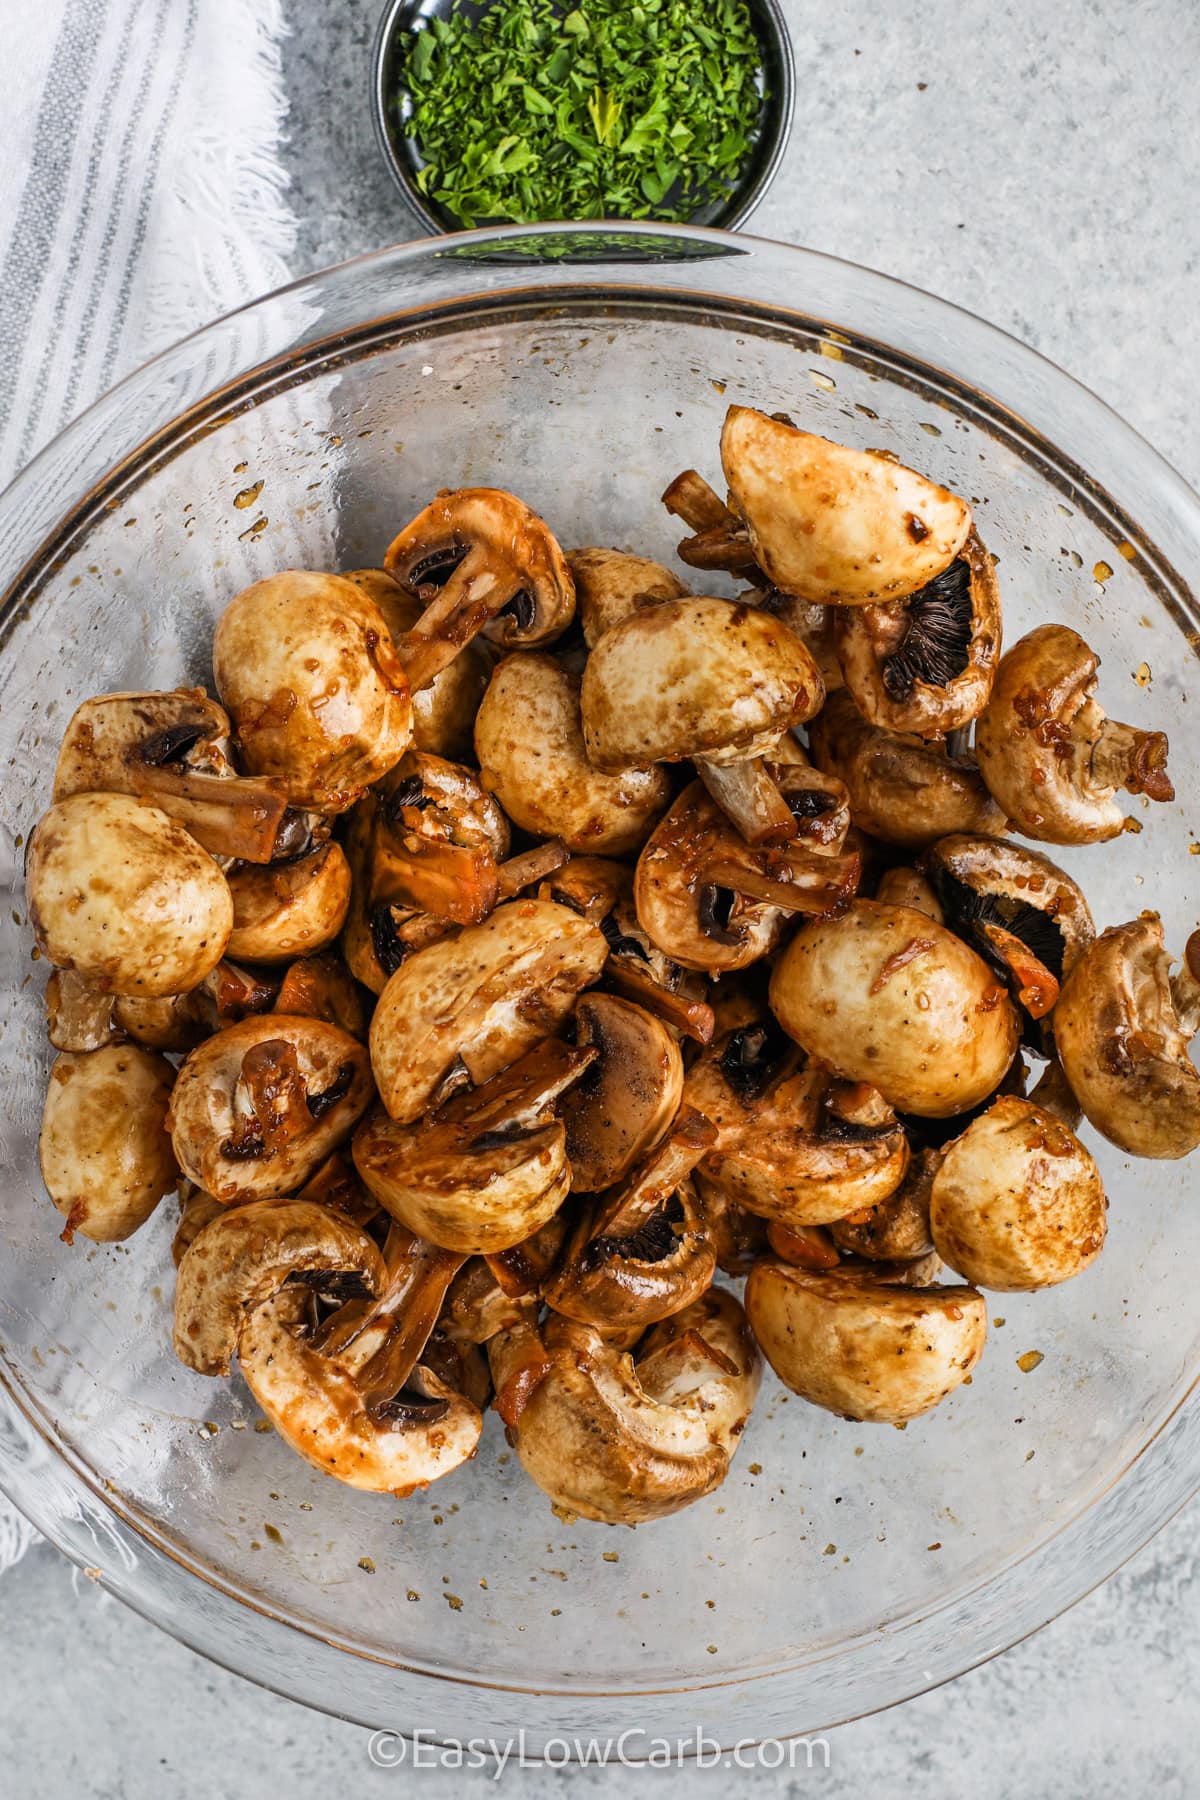 mixed ingredients to make Oven Roasted Mushrooms